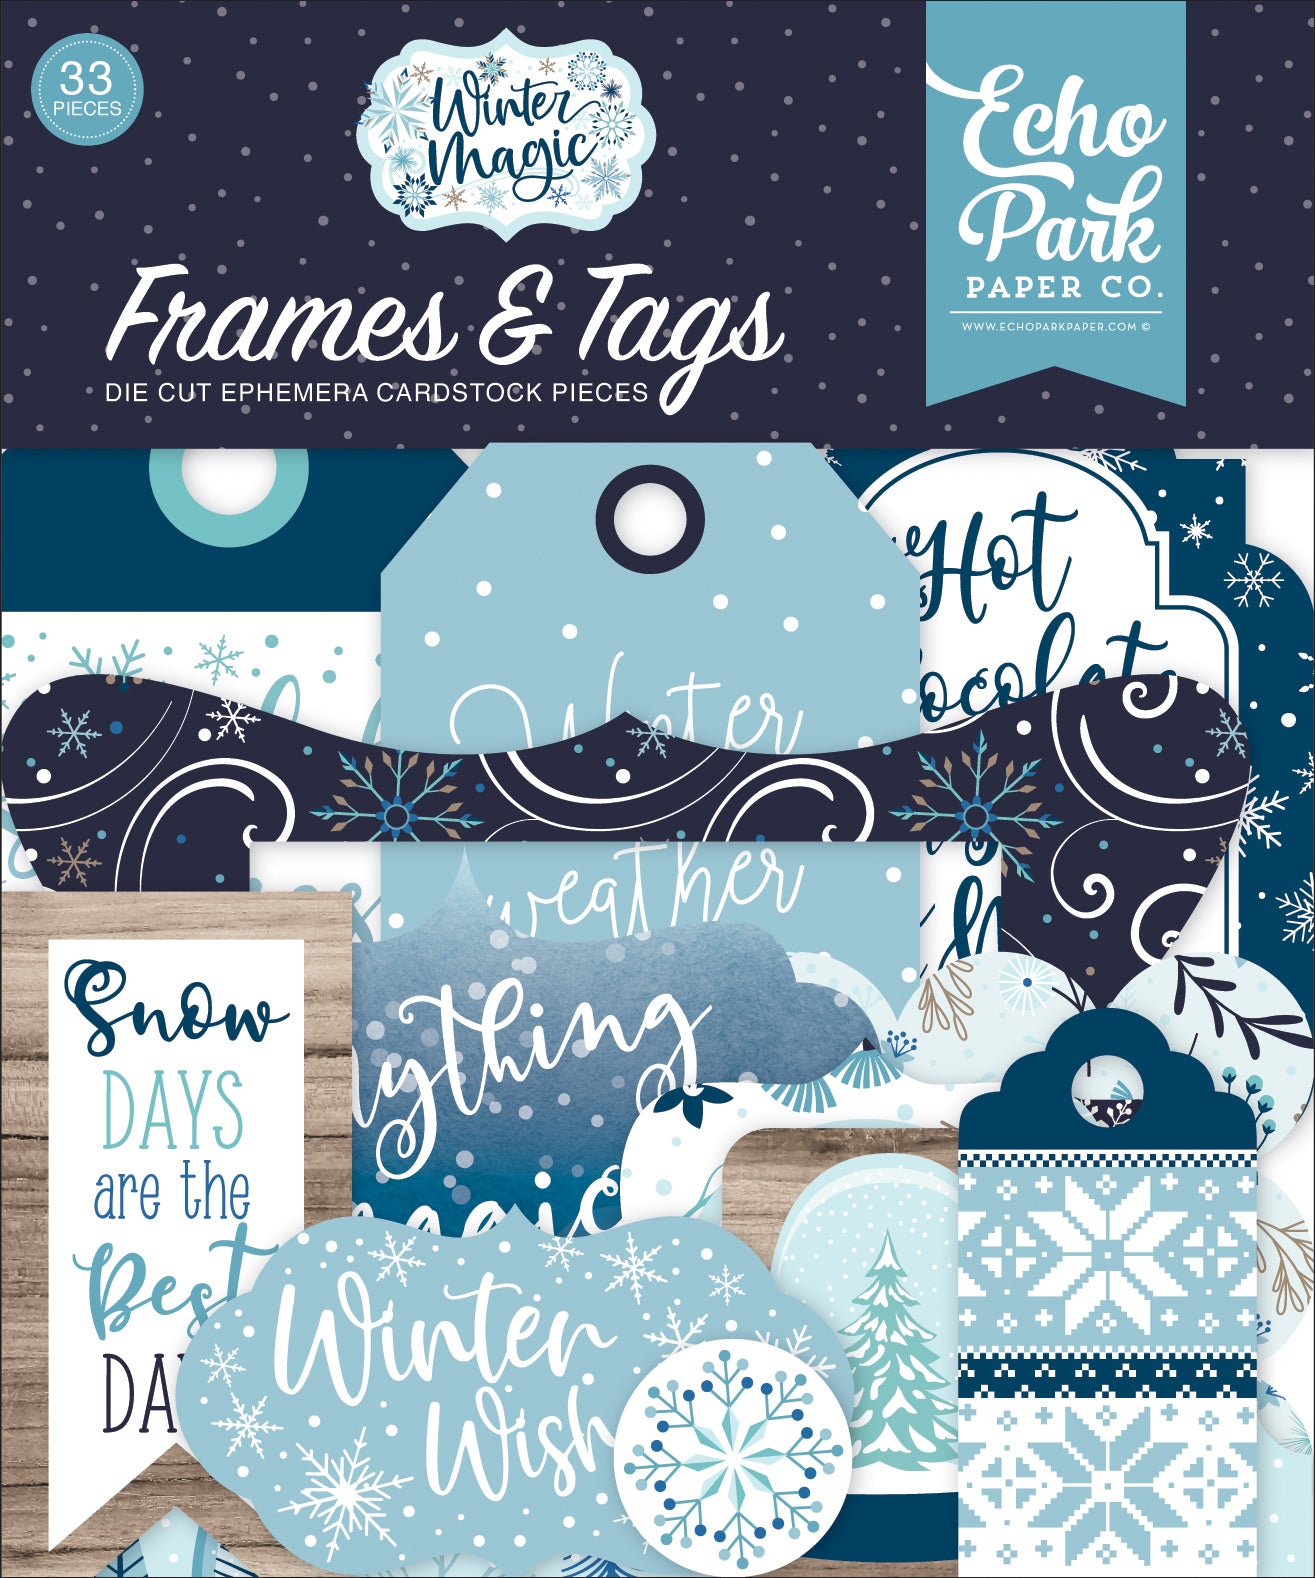 Winter Magic Frames & Tags Die Cut Cardstock Pack.  Pack includes 33 different die-cut shapes ready to embellish any project.